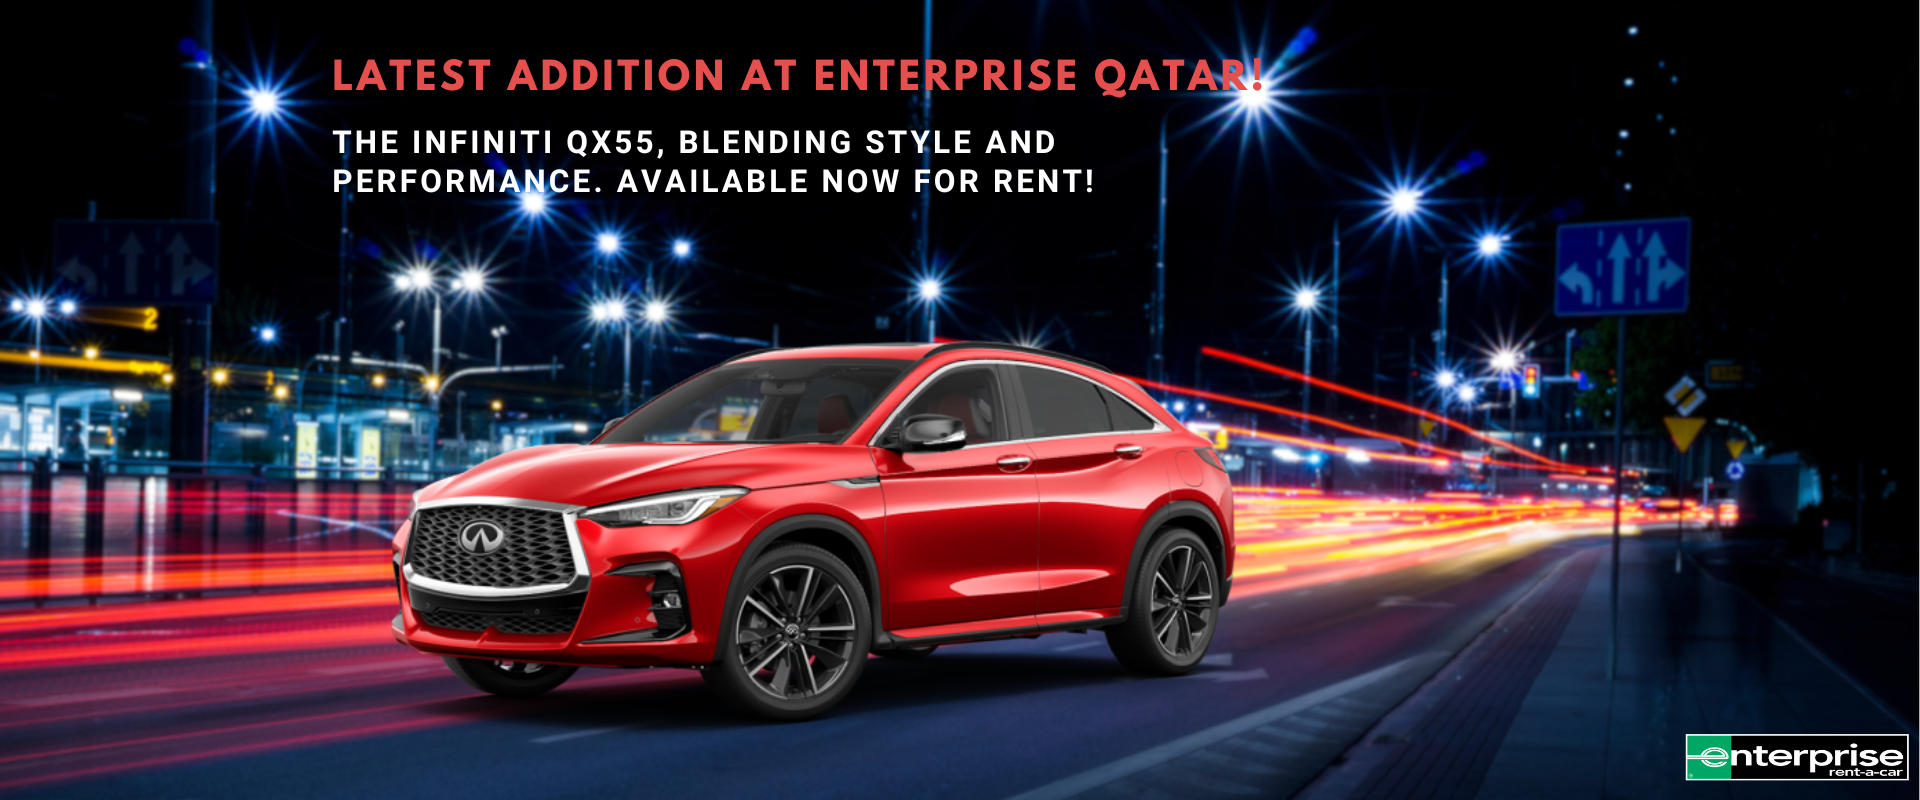 Latest addition in Enterprise Qatar, the Infiniti QX55, blending style and performance. Available now for car rent